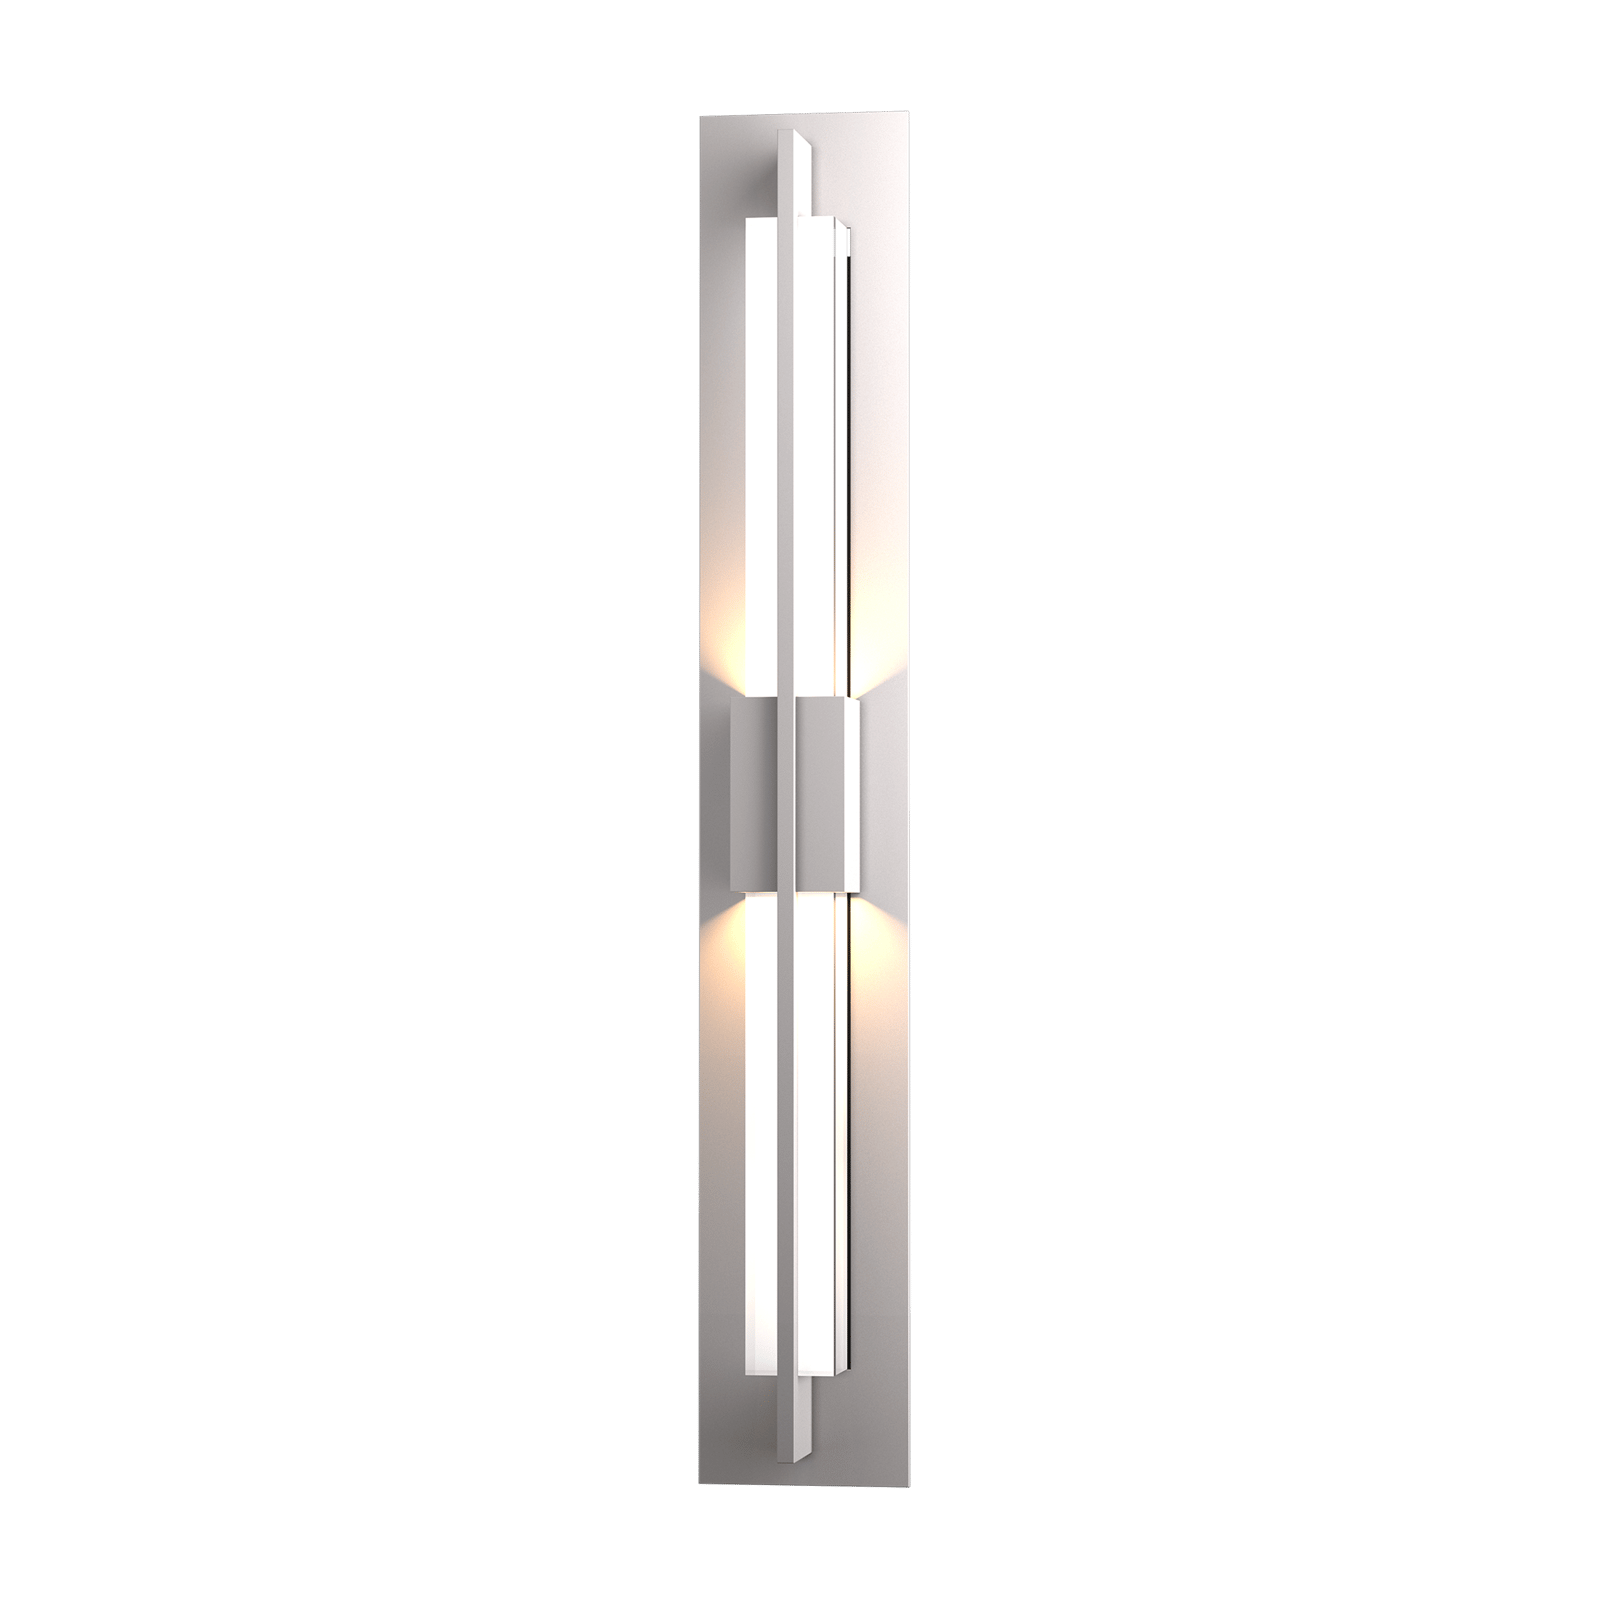 Hubbardton Forge Double Axis LED Outdoor Sconce